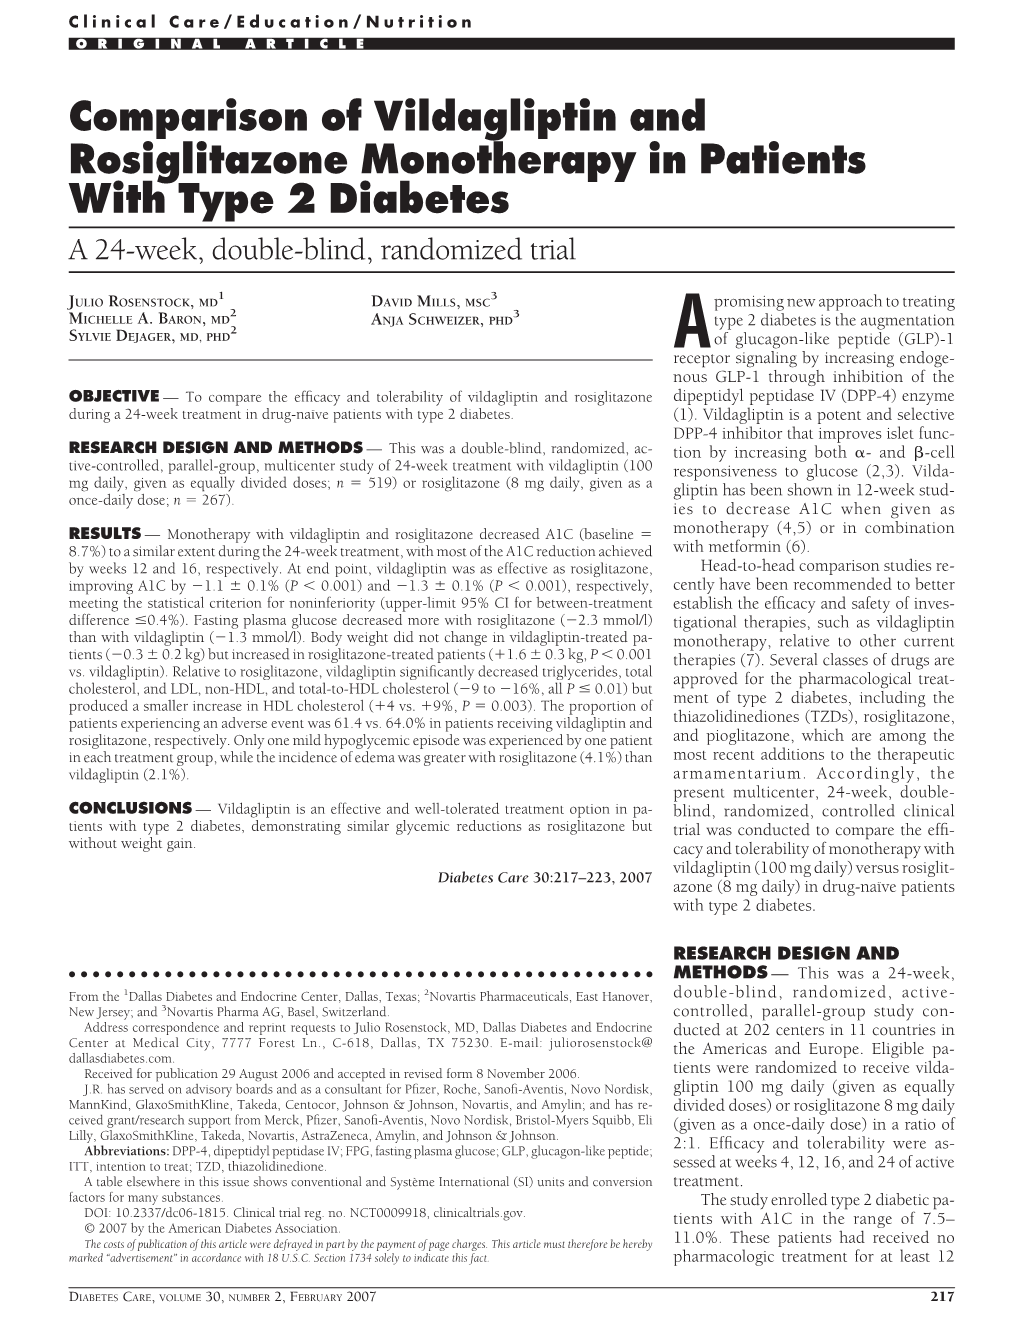 Comparison of Vildagliptin and Rosiglitazone Monotherapy in Patients with Type 2 Diabetes a 24-Week, Double-Blind, Randomized Trial